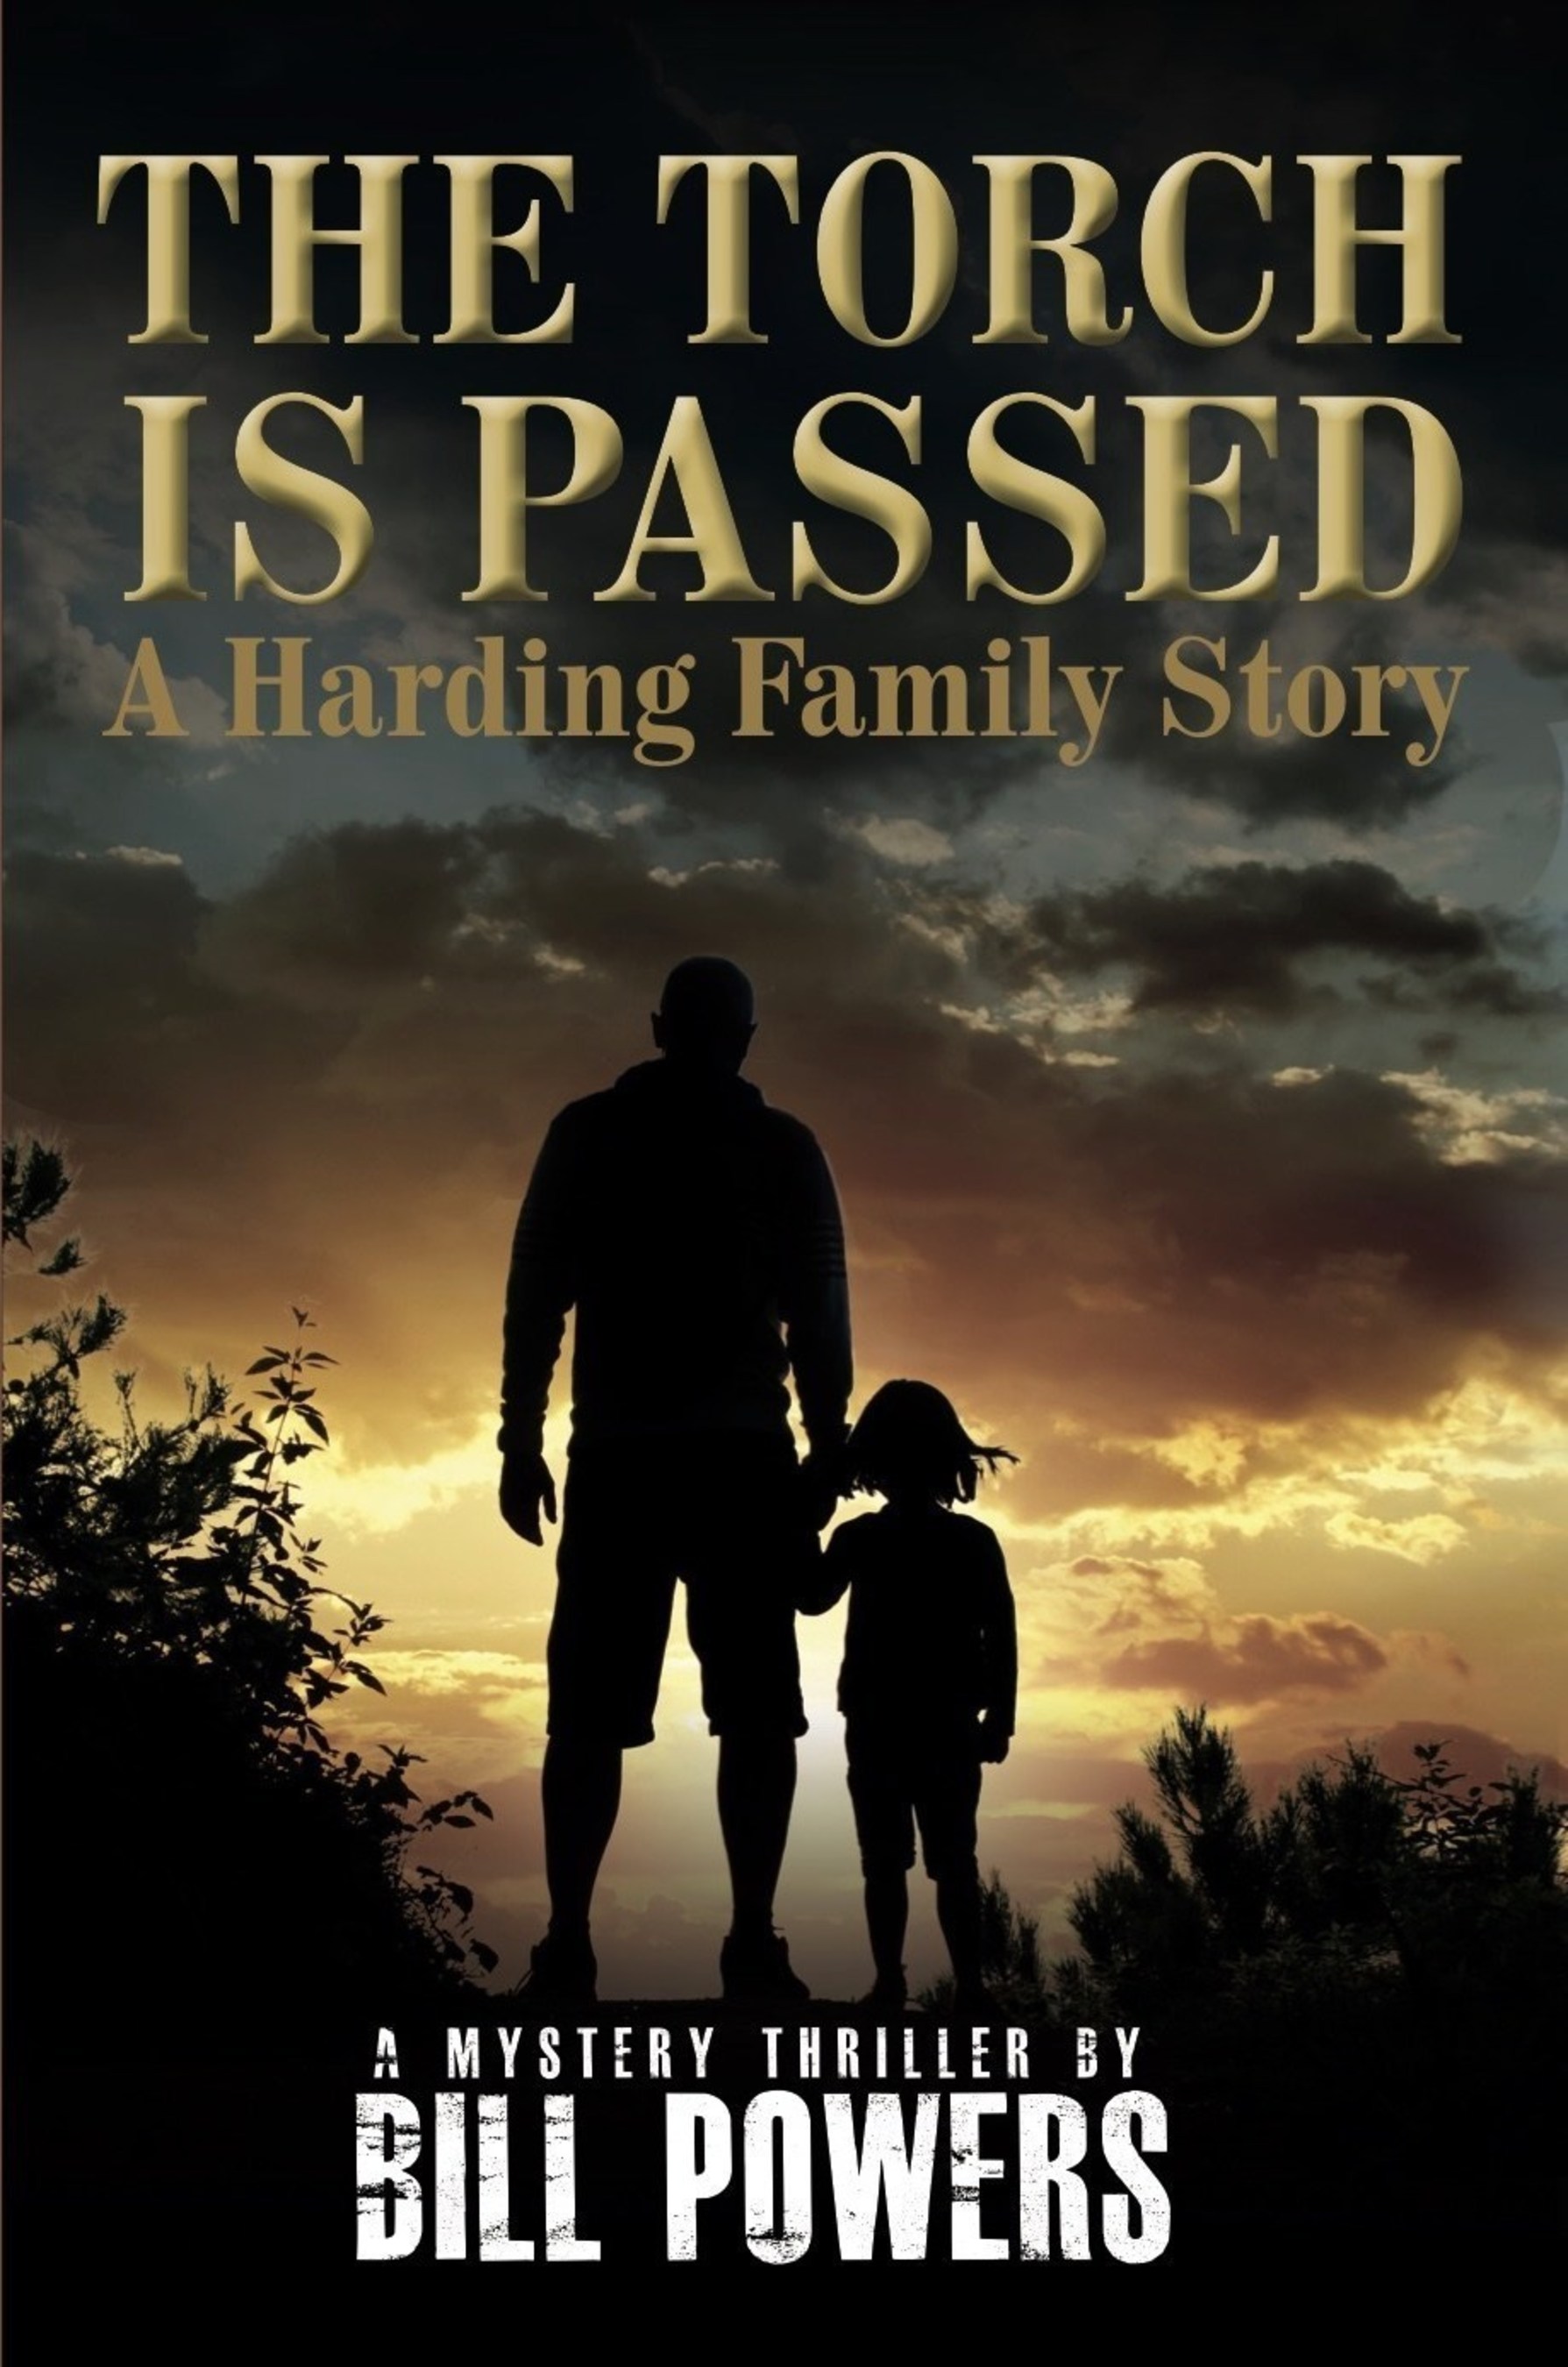 The Torch is Passed - A Harding Family Story A Suspense/Thriller from Bill Powers